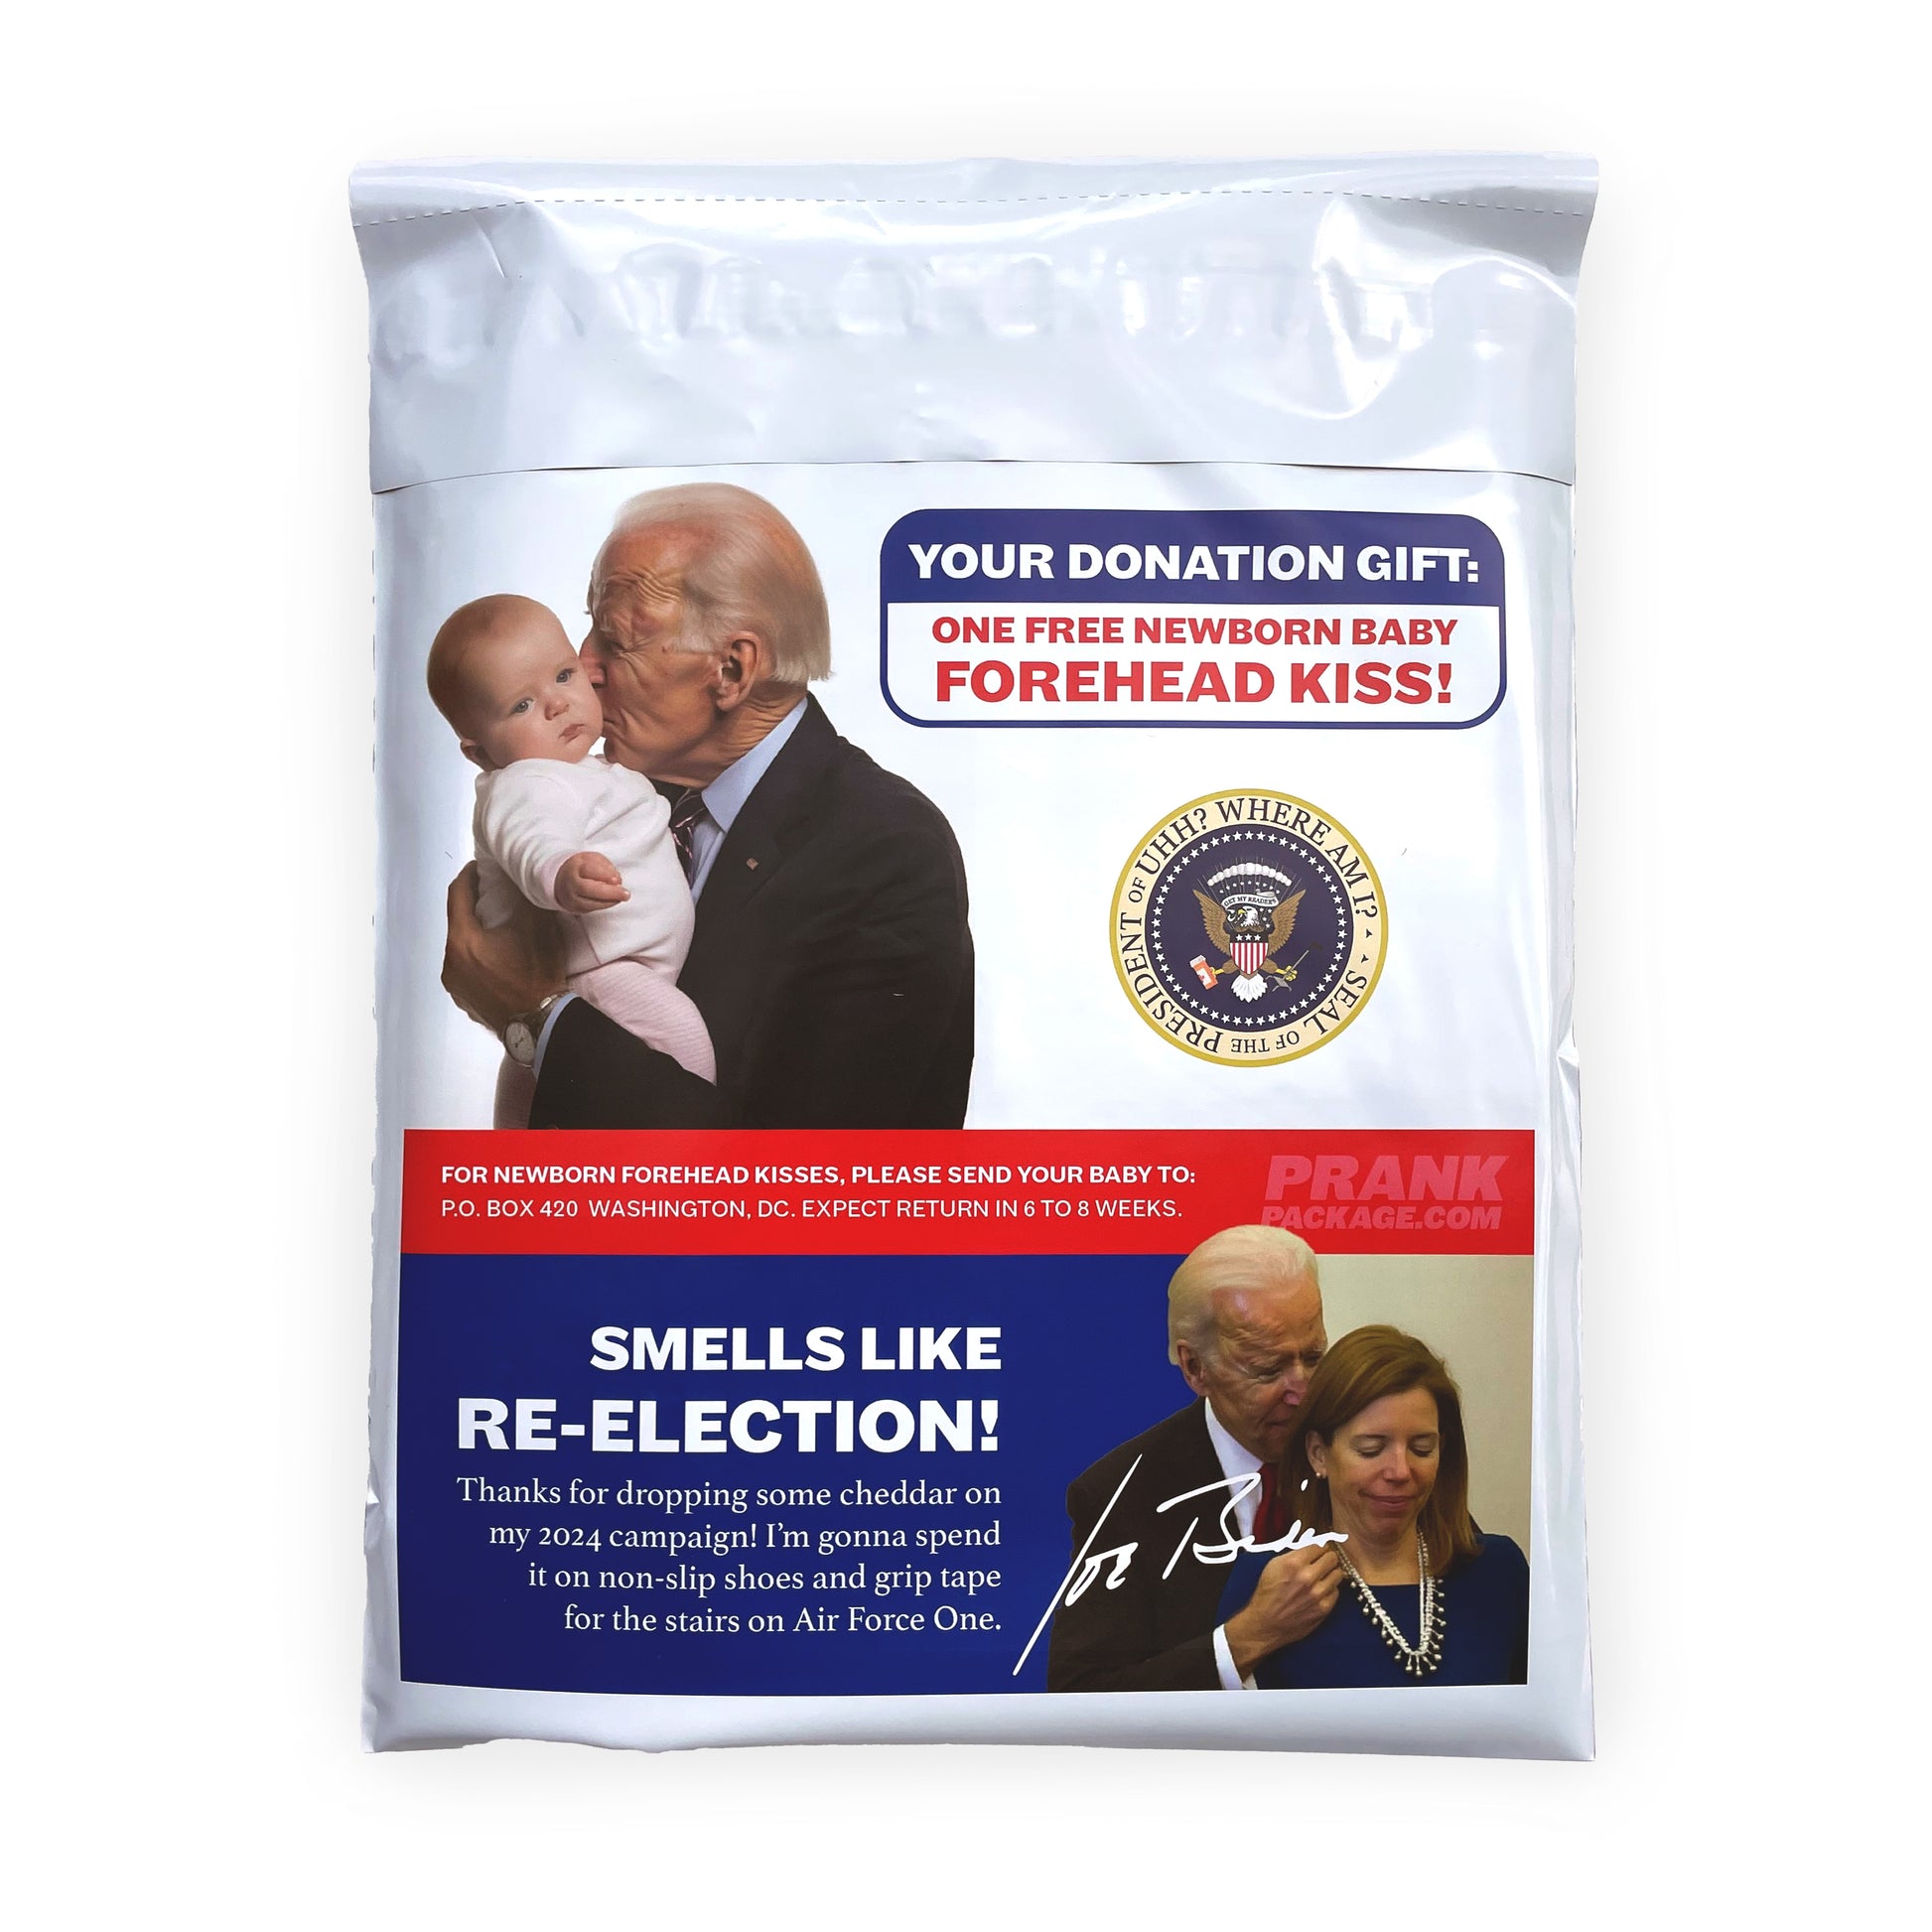 Back side of Joe Biden prank package features an image of Joe Biden kissing a baby with text that says, "YOUR DONATION GIFT: ONE FREE NEWBORN BABY FOREHEAD KISS!". It also features a picture of Joe Biden sniffing a woman with the text, "SMELLS LIKE RE-ELECTION!"